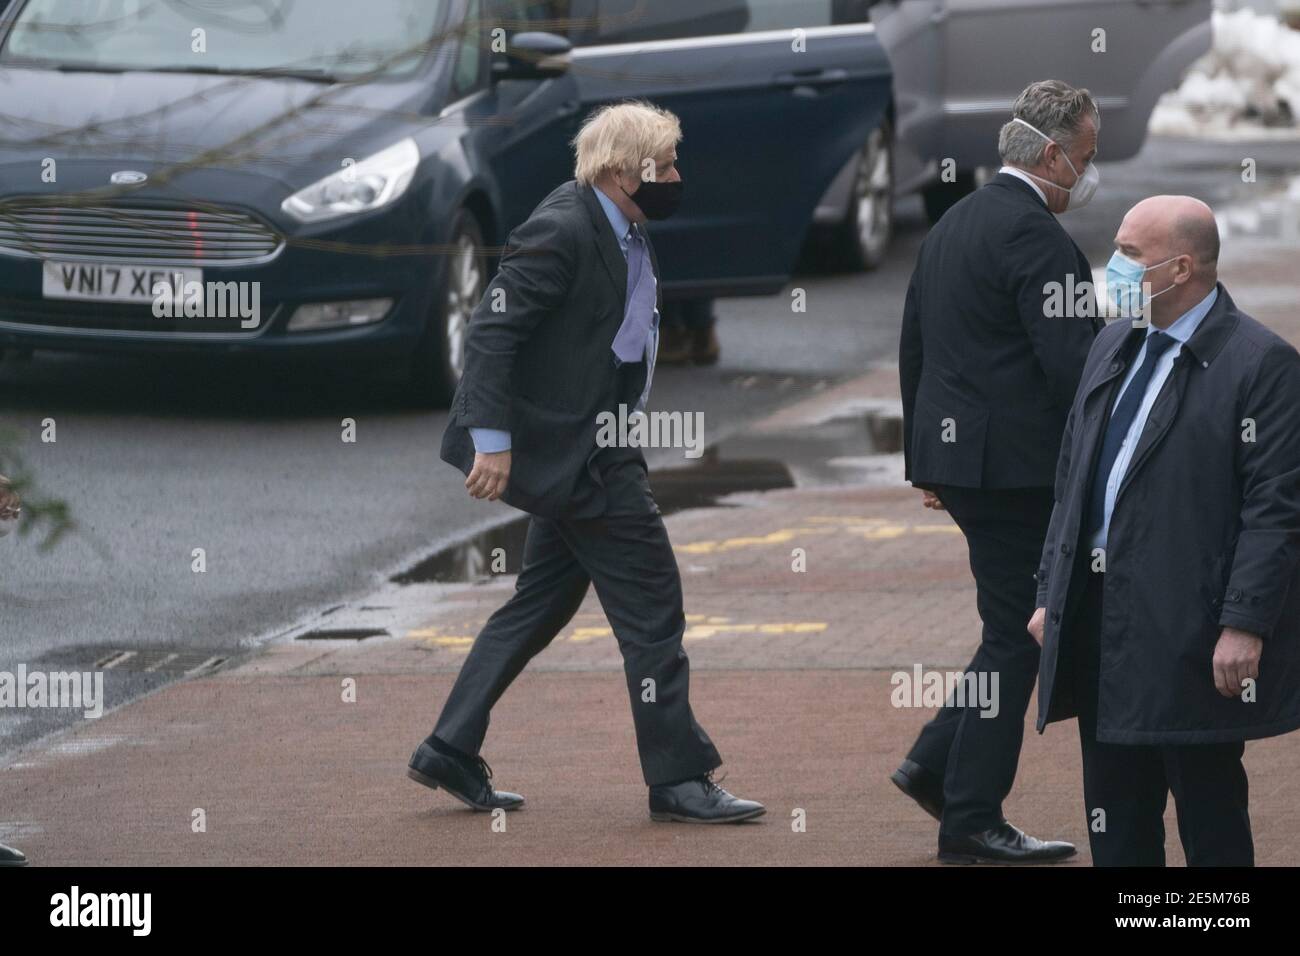 Livingston, Scotland, UK. 28 January 2021. Prime Minister Boris Johnson arrives at Valneva vaccine production plant in Livingston on his visit to Scotland. The plant has commenced production of vaccines today. Iain Masterton/Alamy Live News Stock Photo